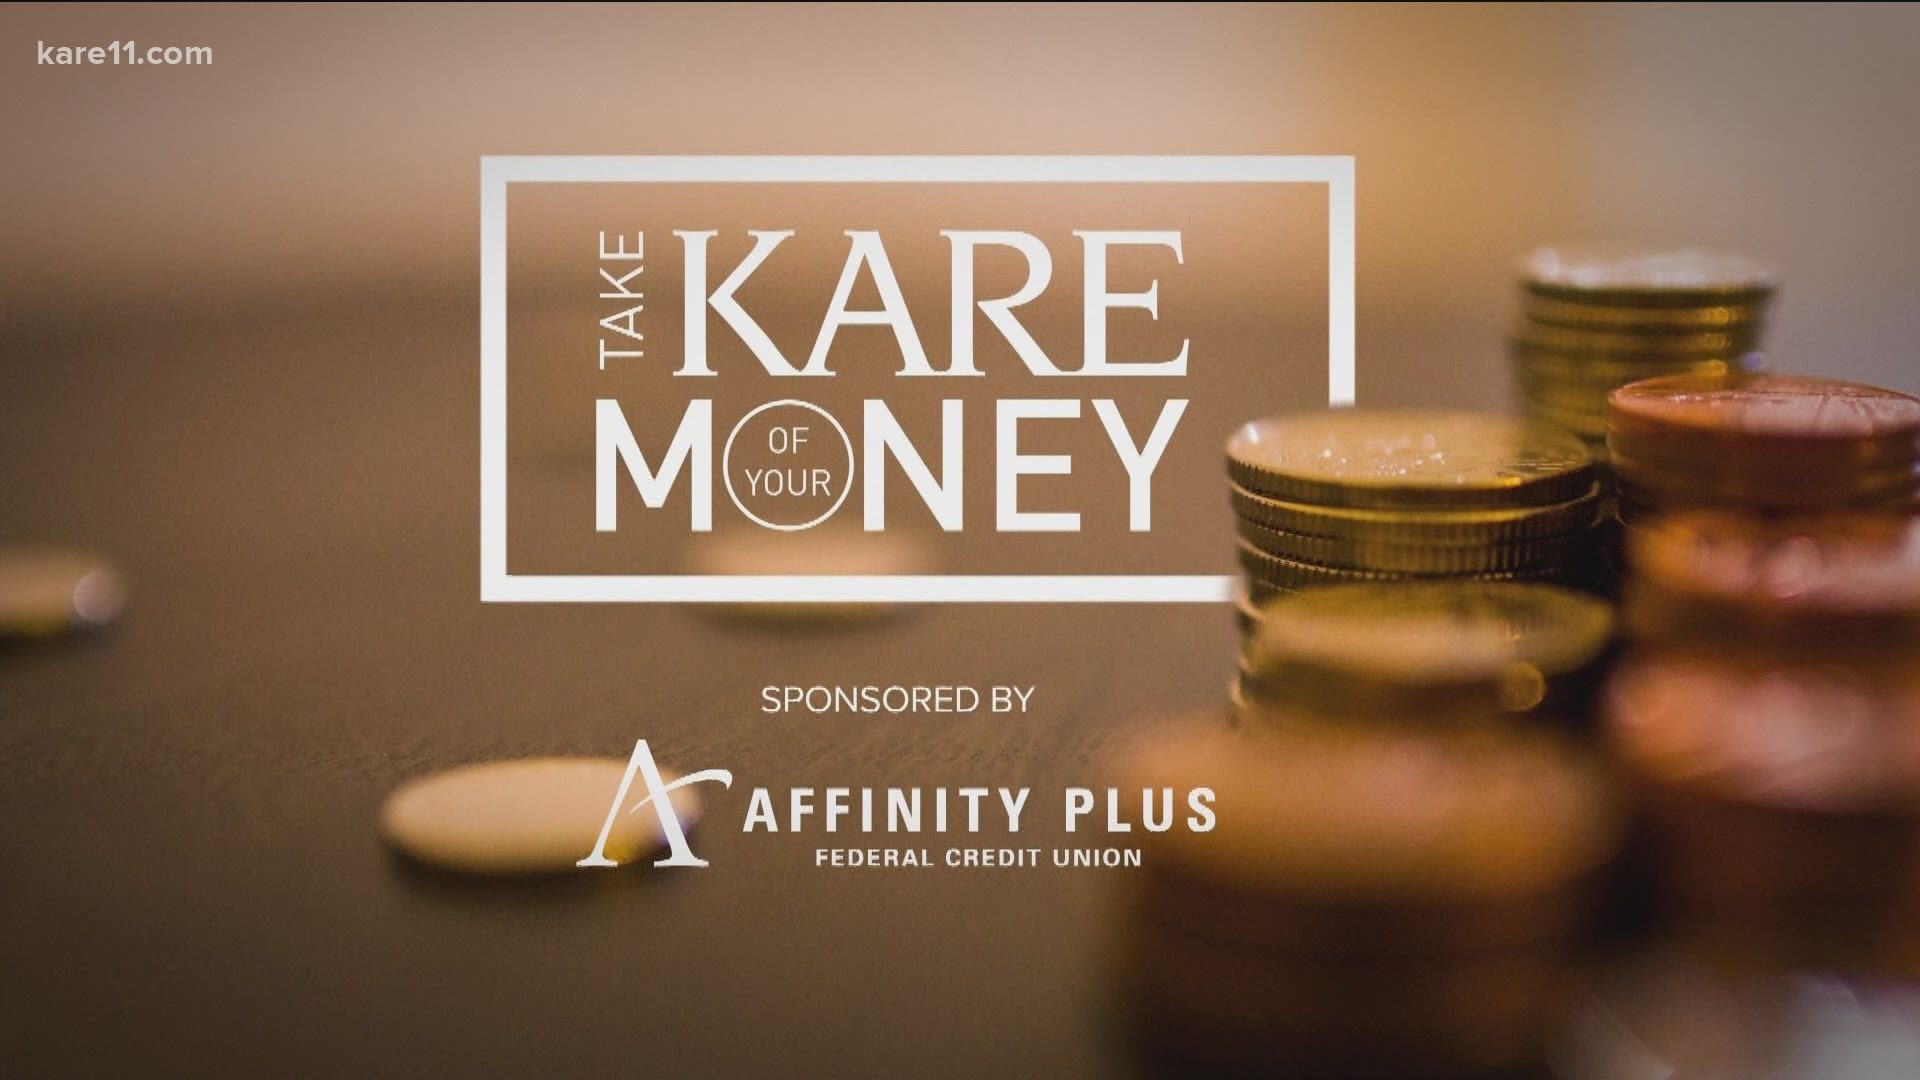 We're diving into the topics that impact your wallet. Here are the latest headlines from the Take KARE of Your Money team.